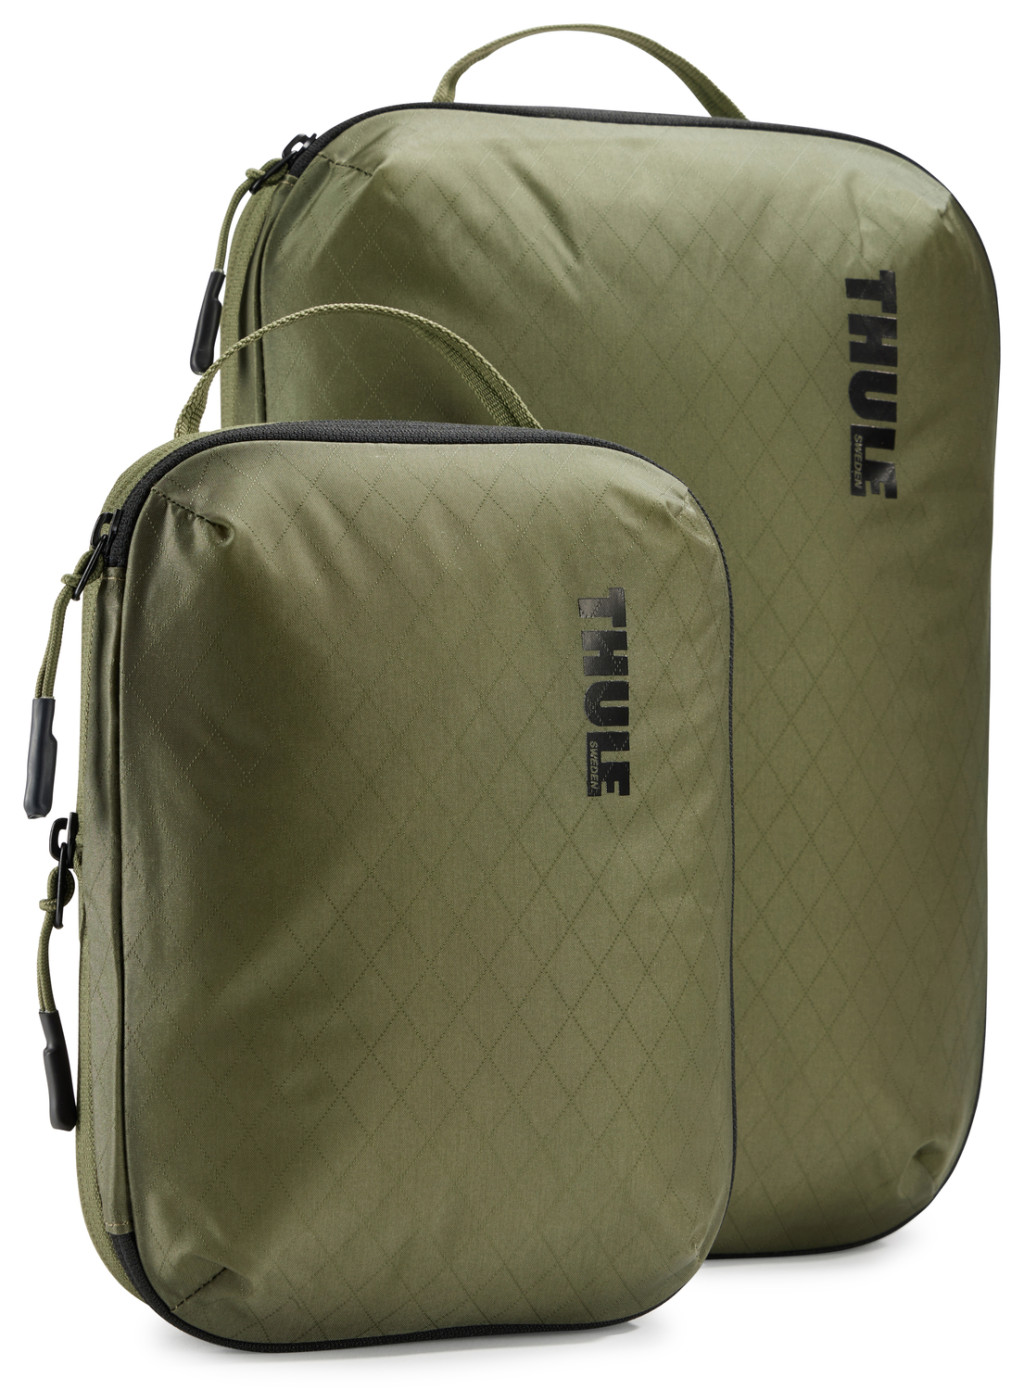 Thule | Compression Cube Set | Packing Cube | Soft Green